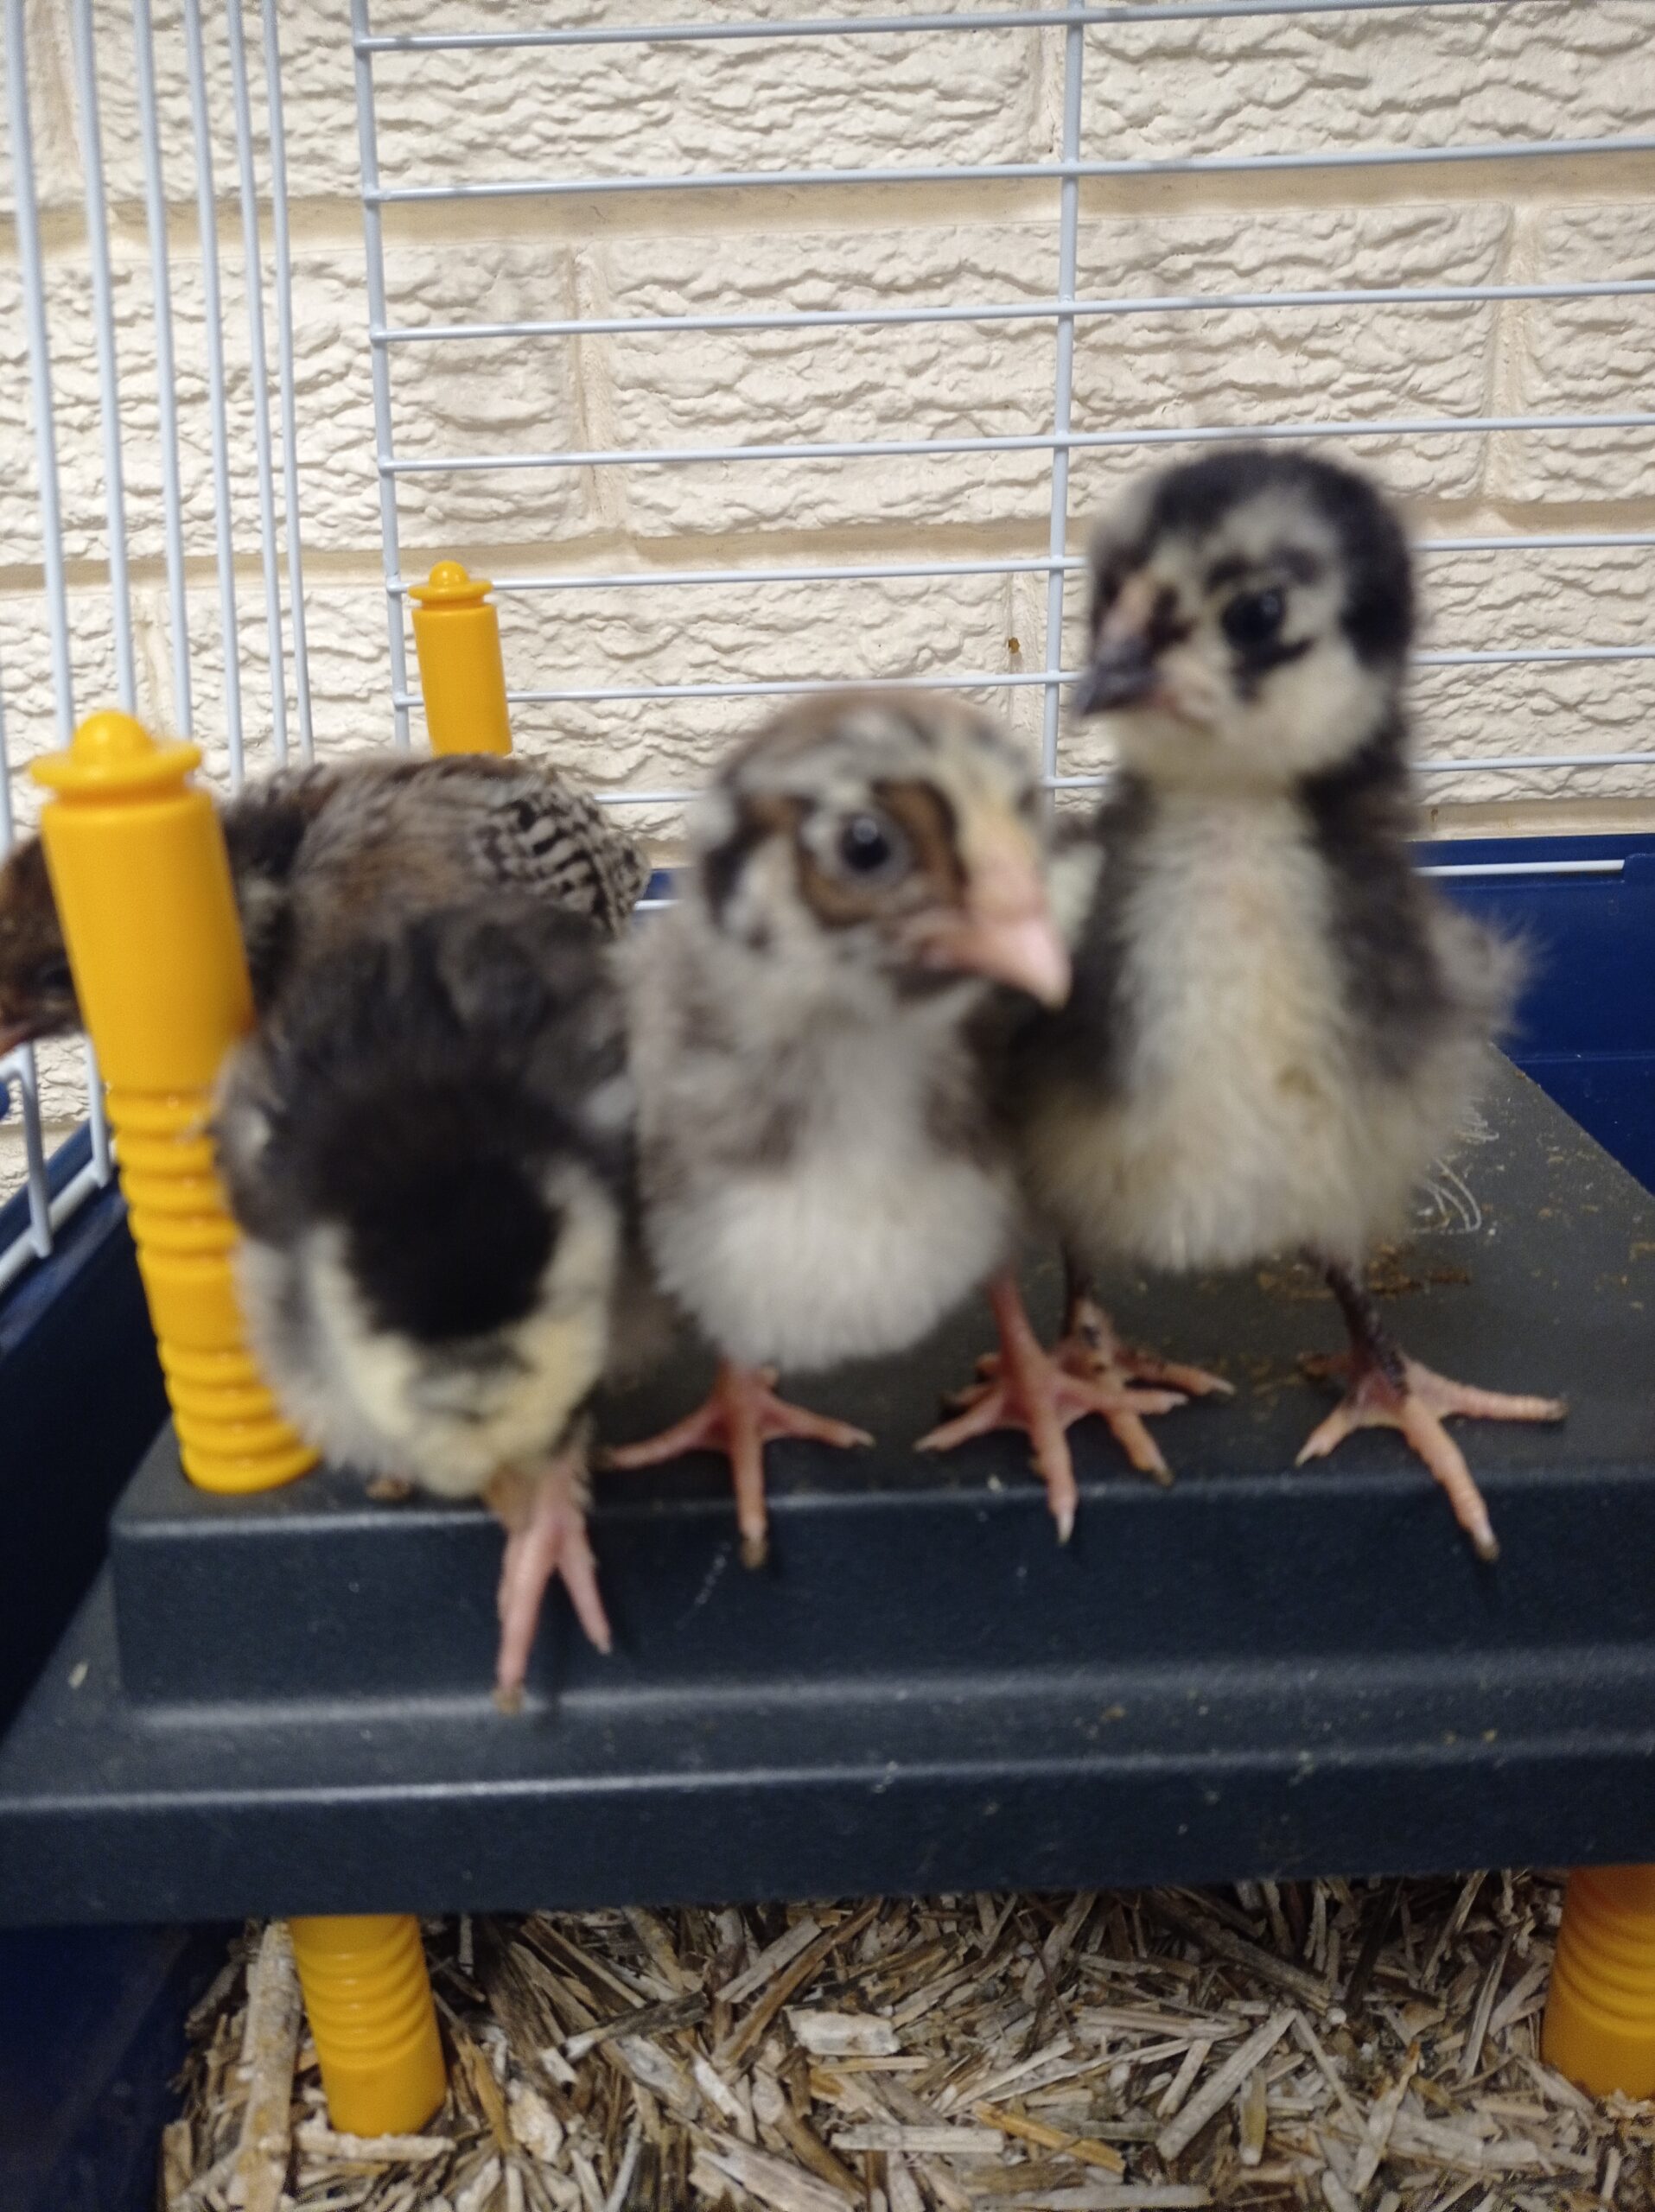 The chicks have hatched!